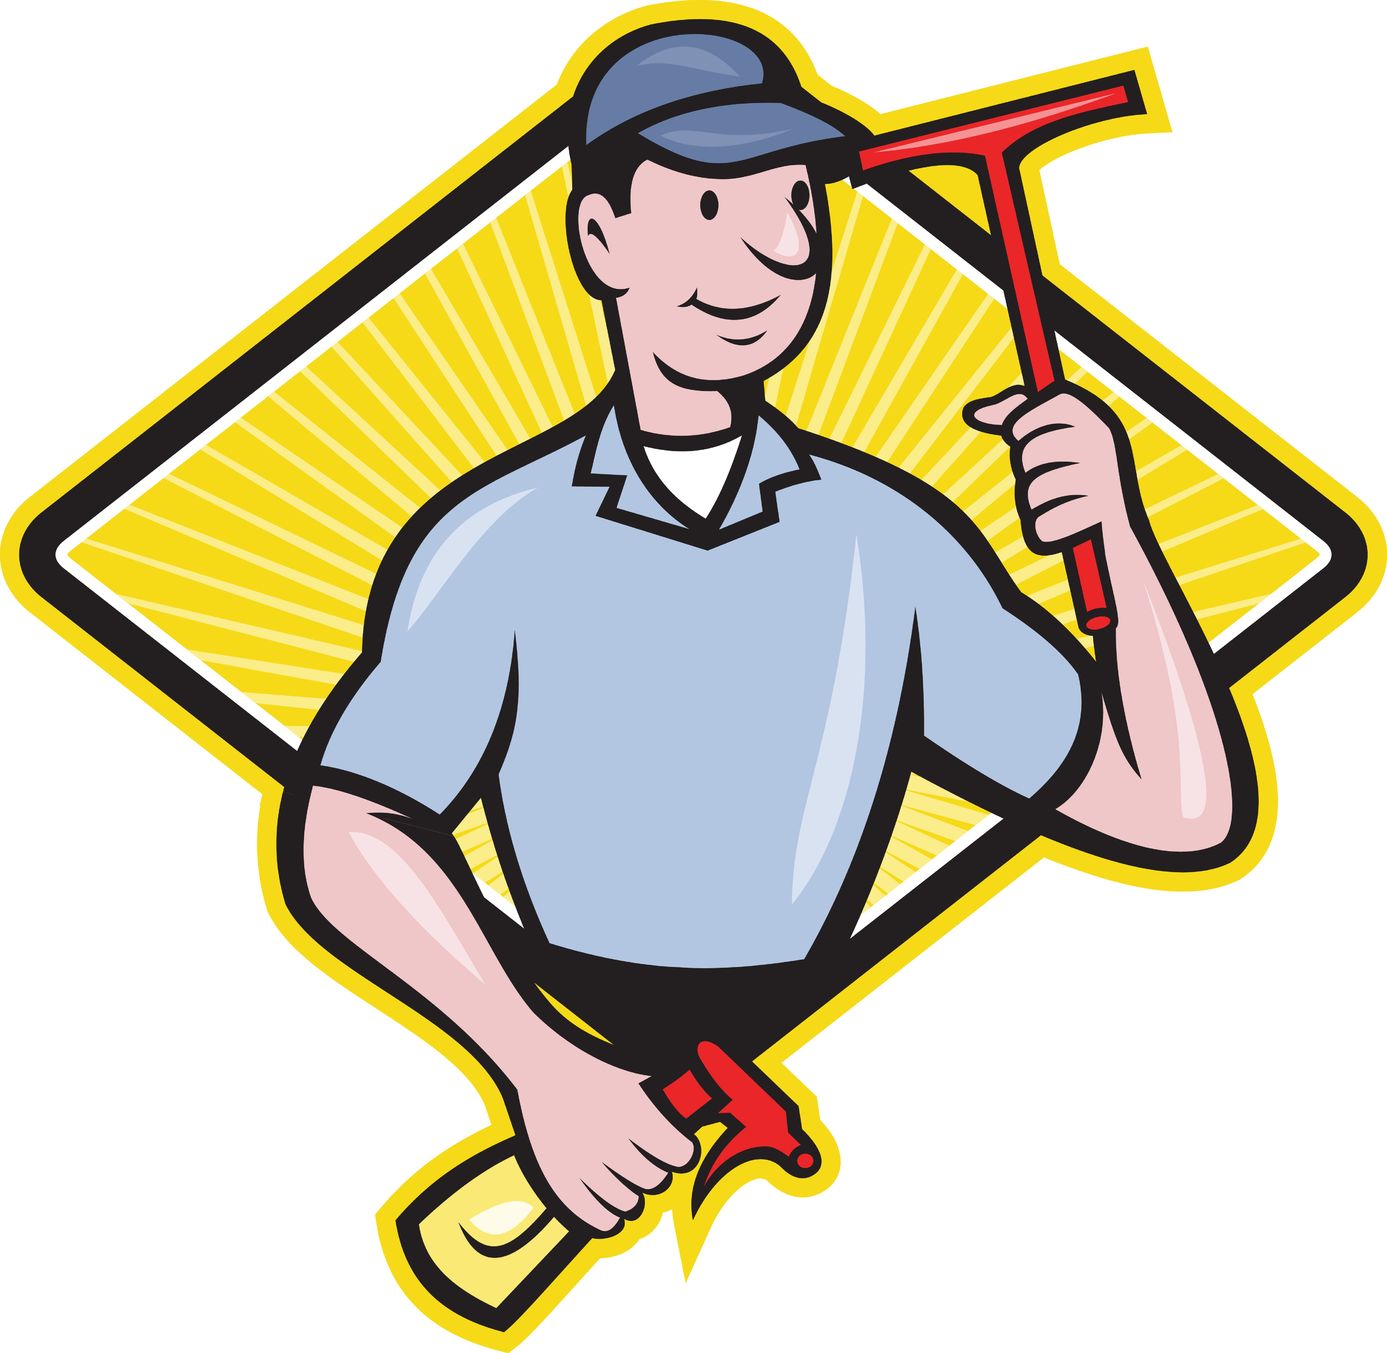 Janitorial Service Clipart